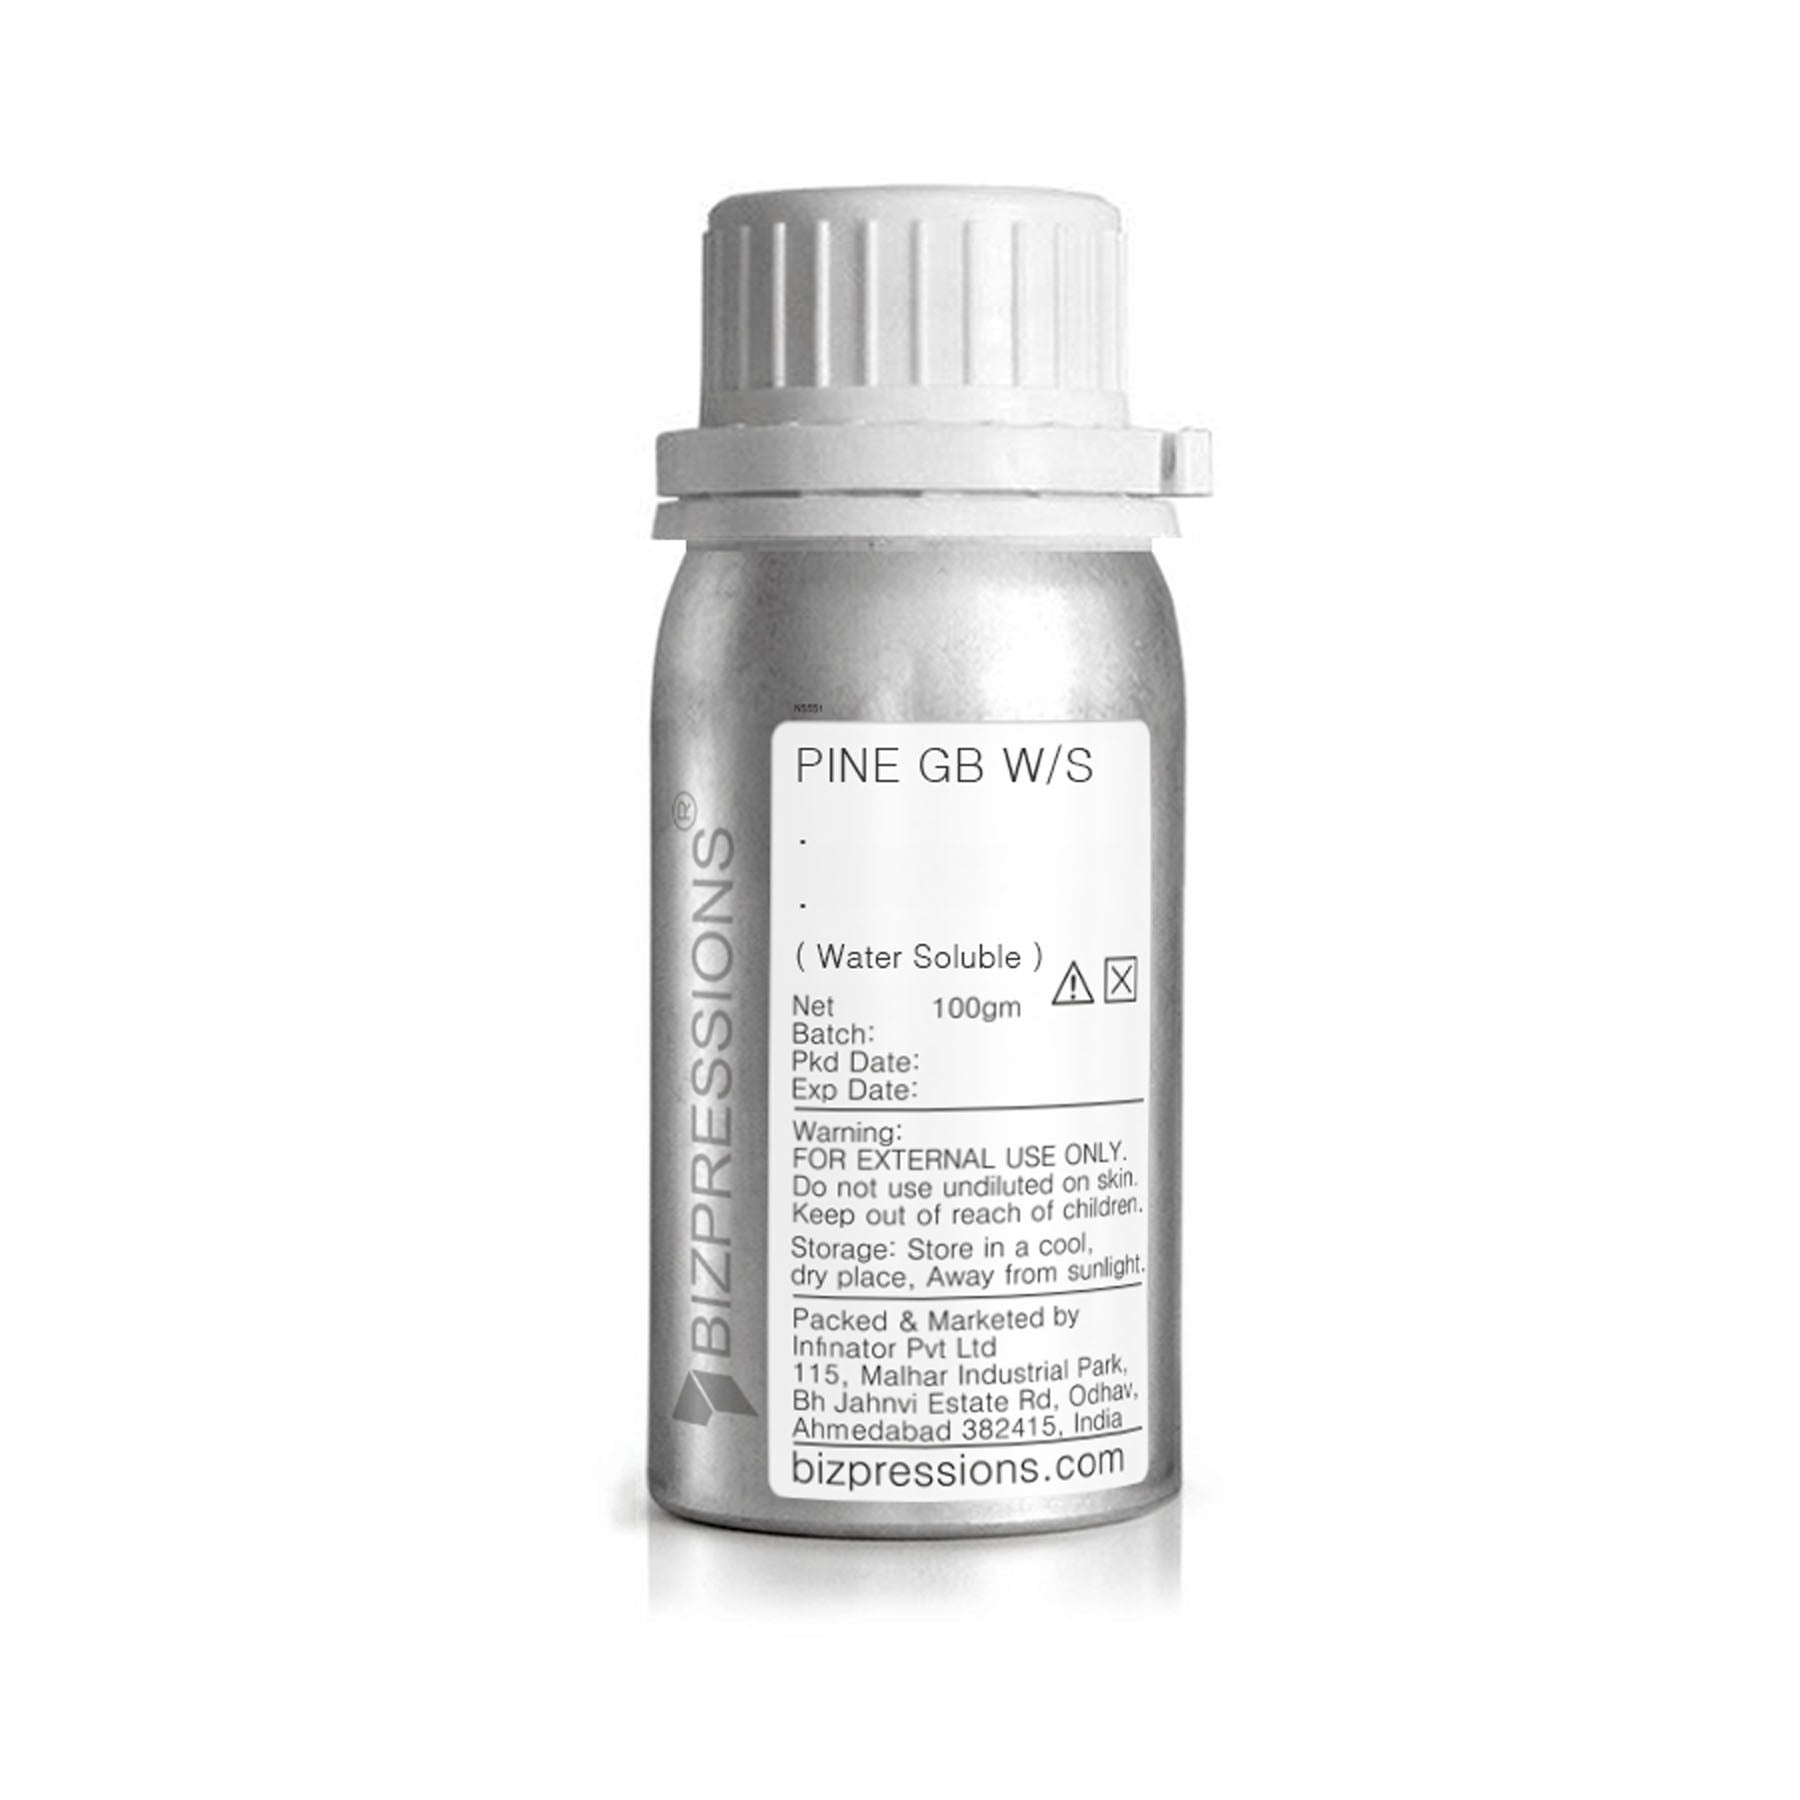 PINE GB W/S - Fragrance ( Water Soluble ) - 100 gm